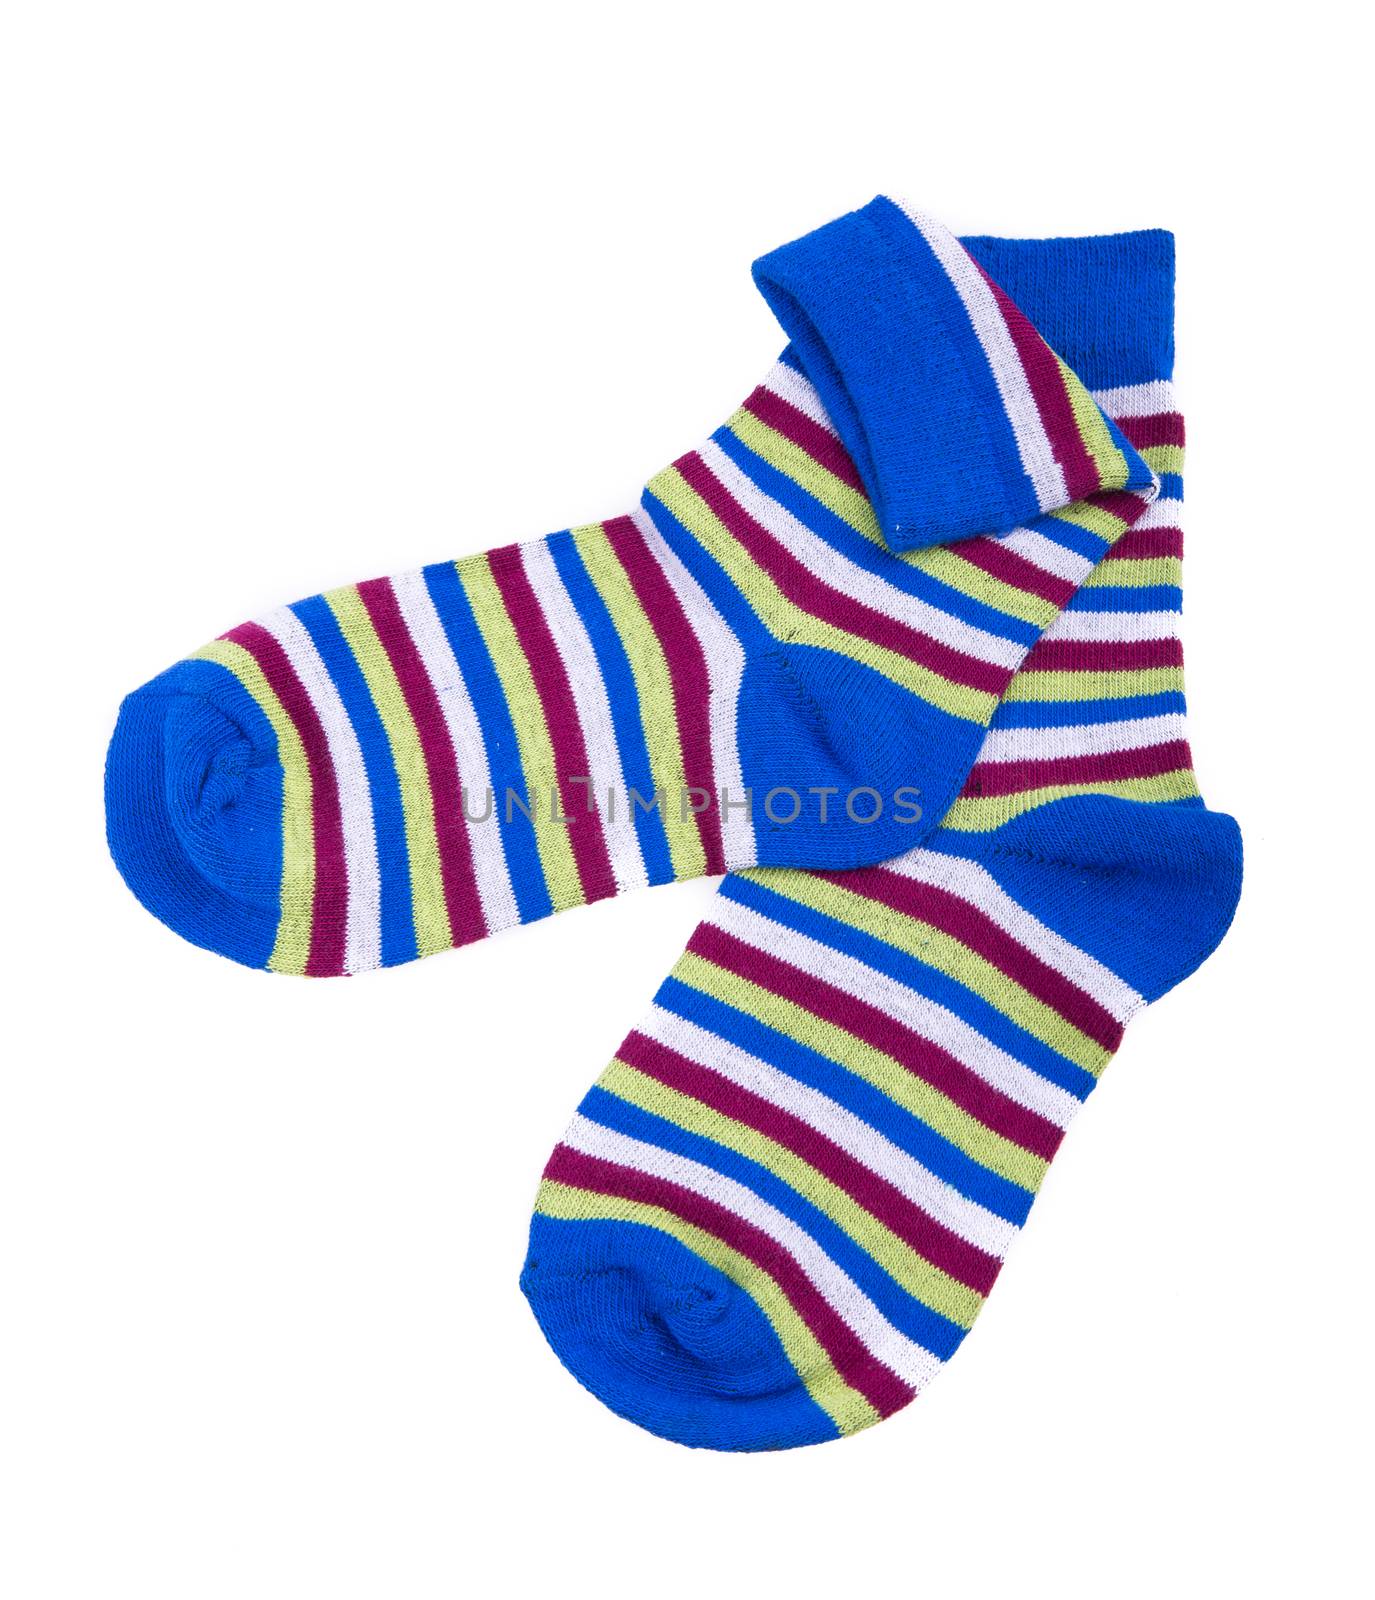 Multicolor child's striped socks isolated on white background